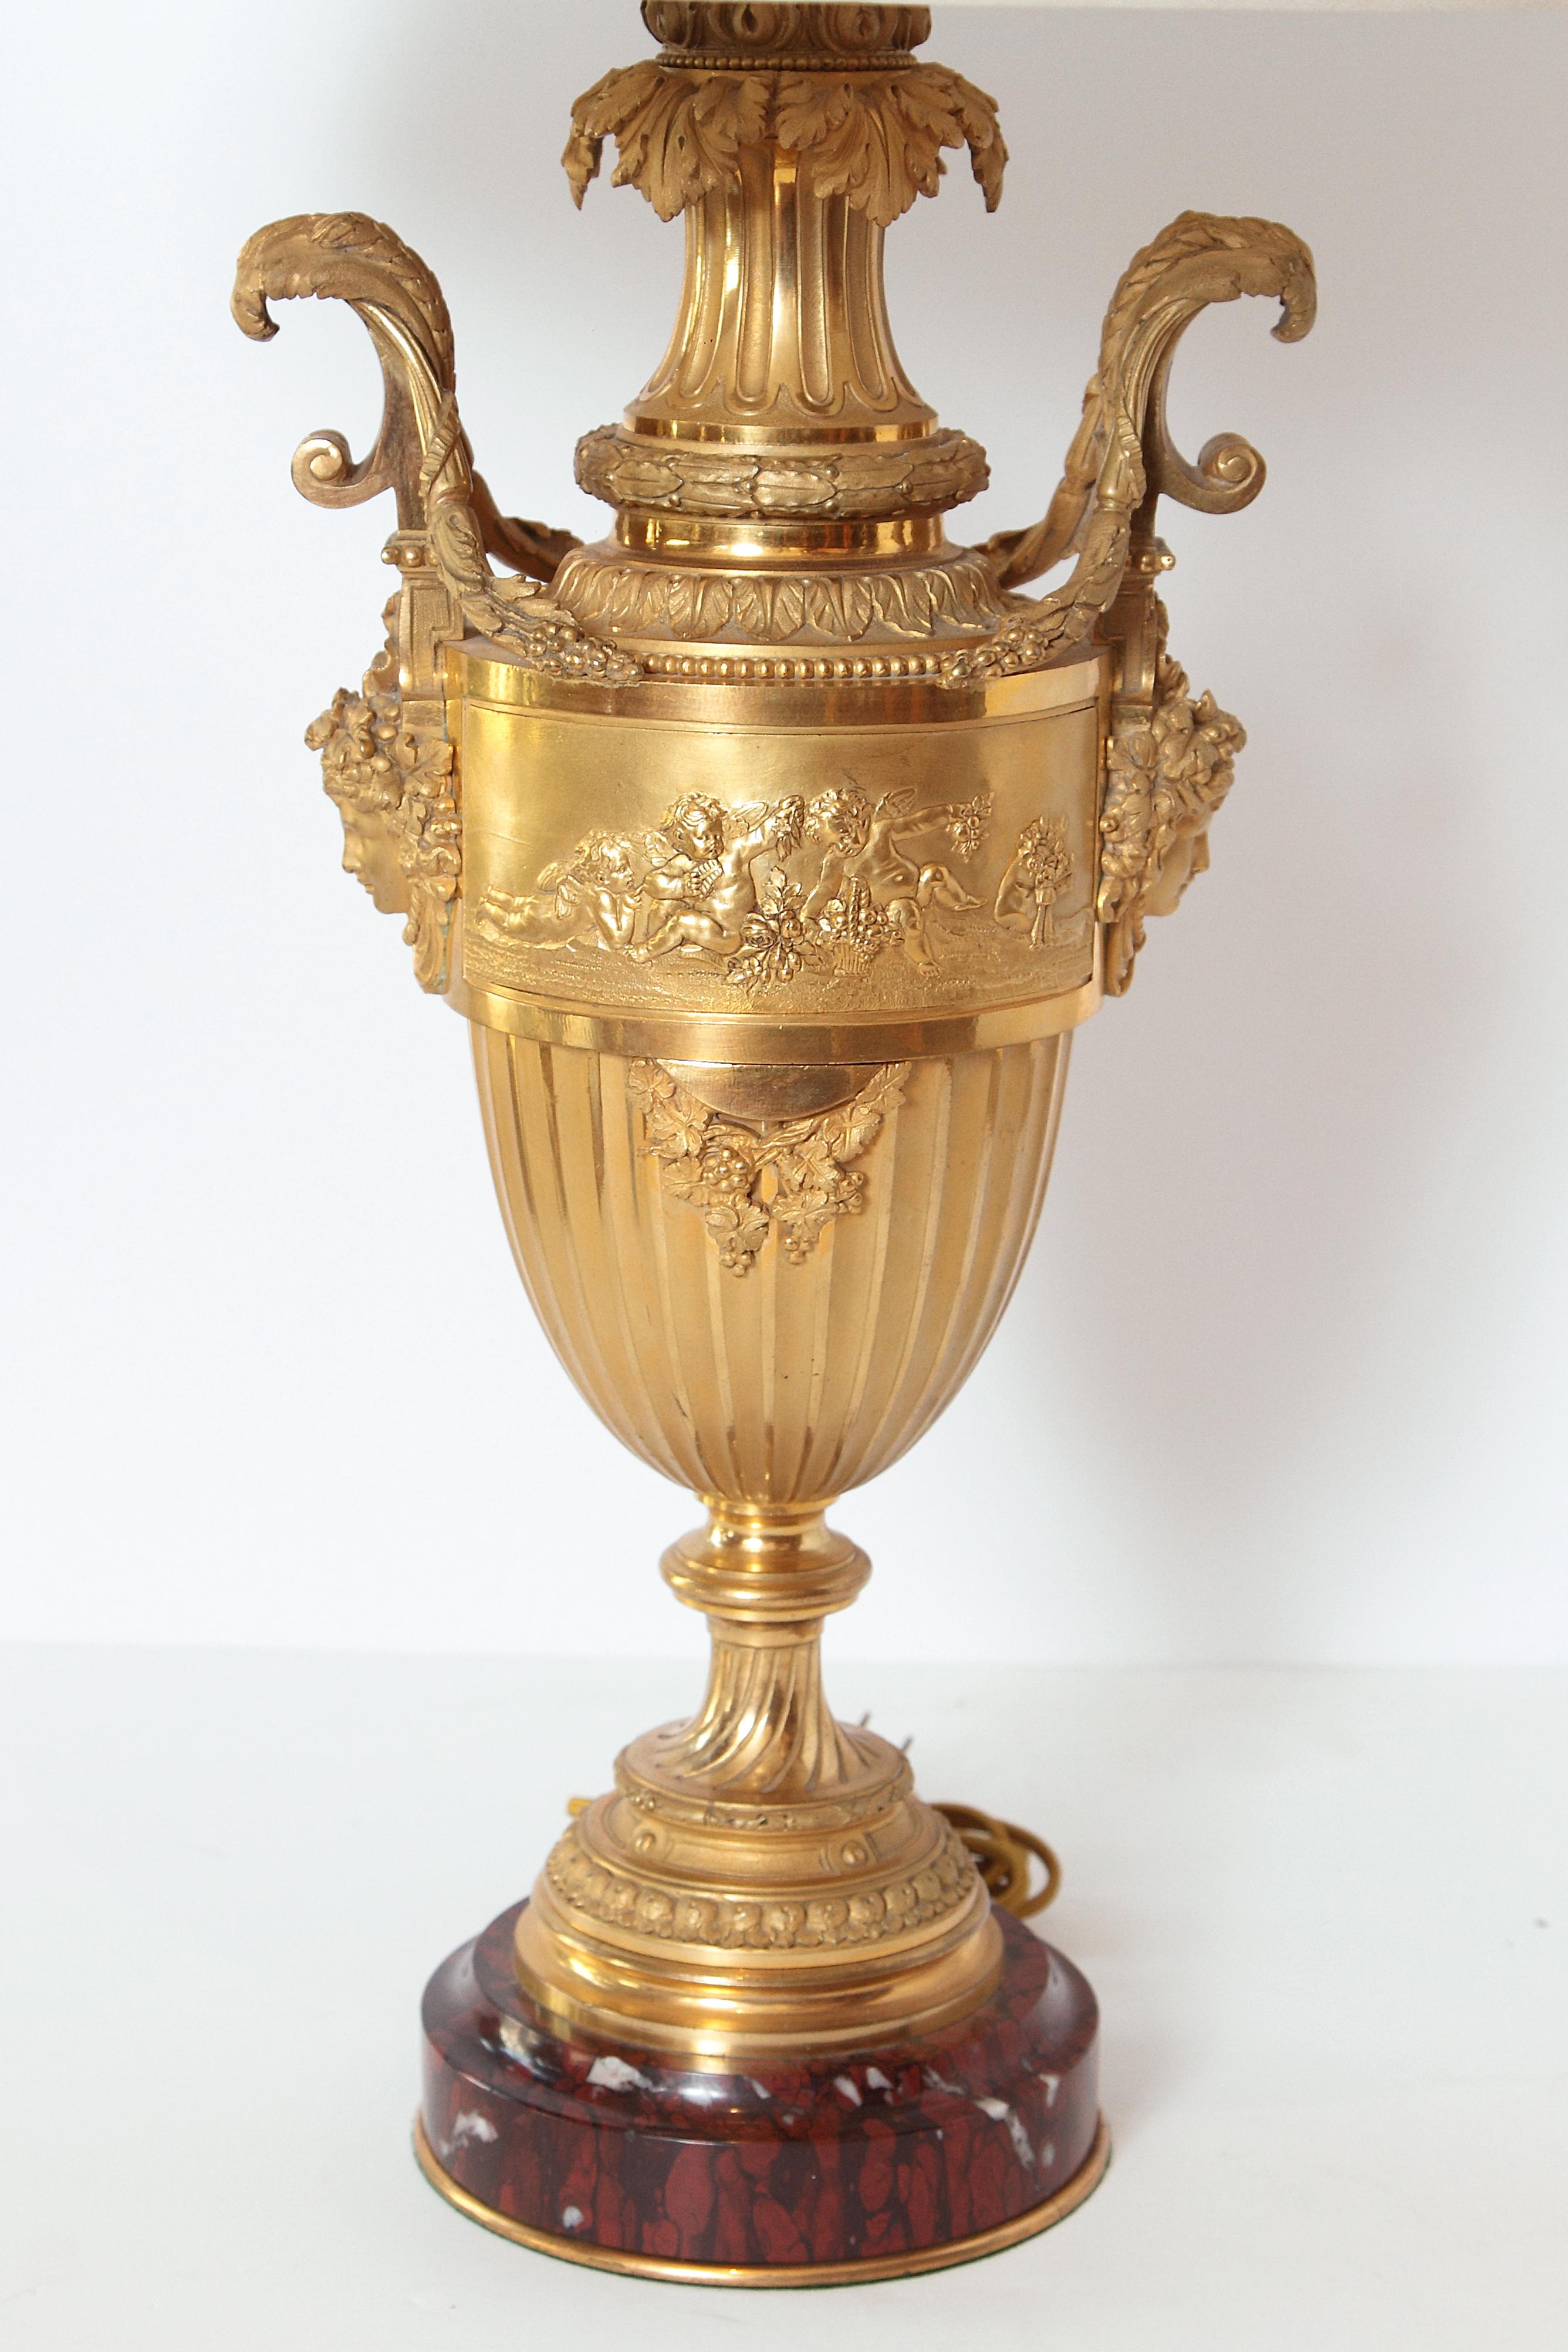 Fine quality 19th century French gilt bronze urn lamp on a rouge marble base.